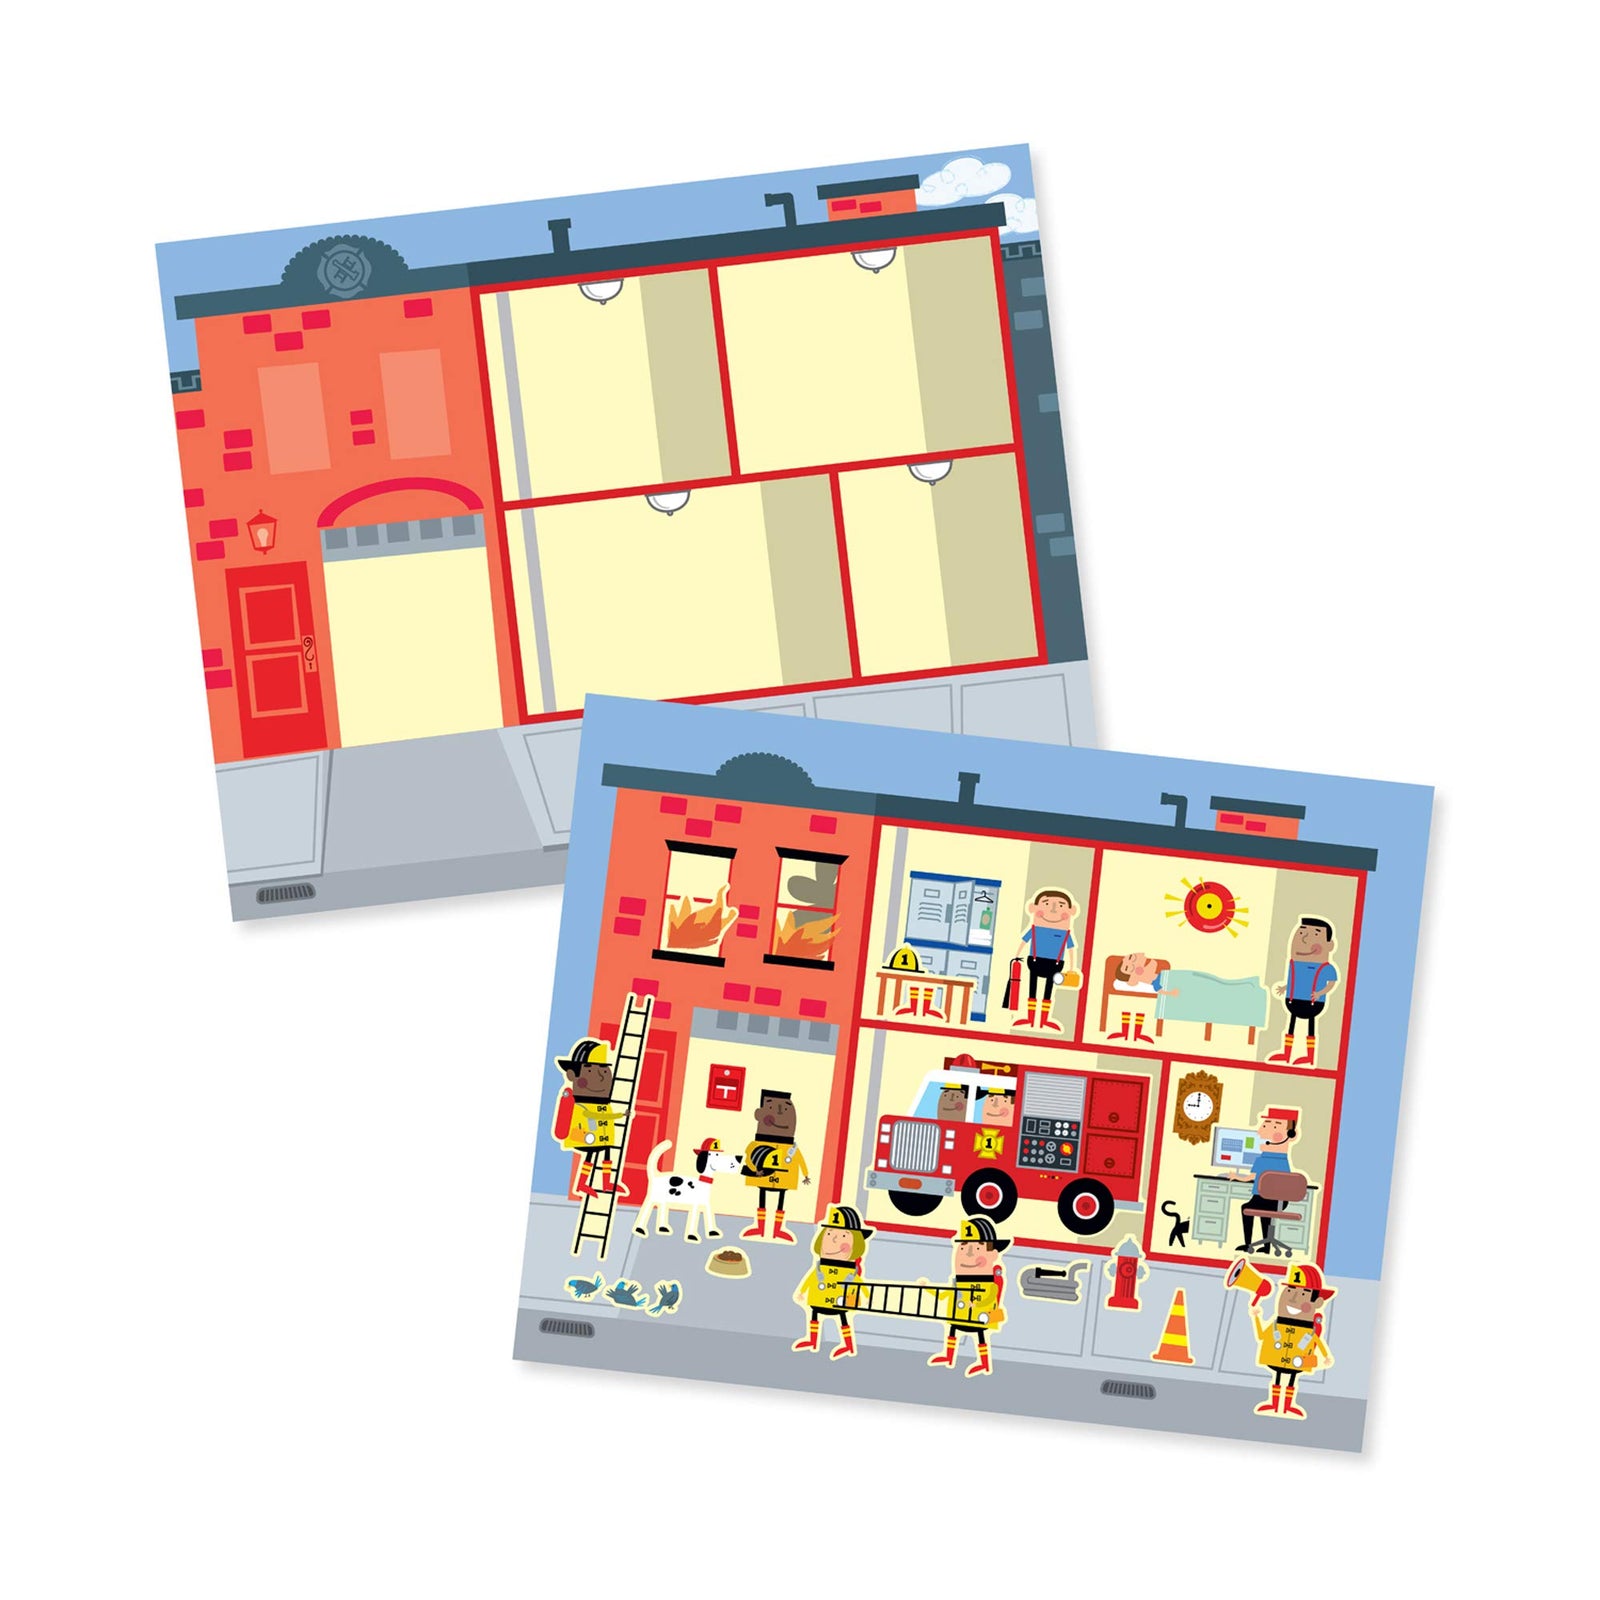 Melissa & Doug Reusable Sticker Pad: My Town - 200+ Stickers and 5 Scenes